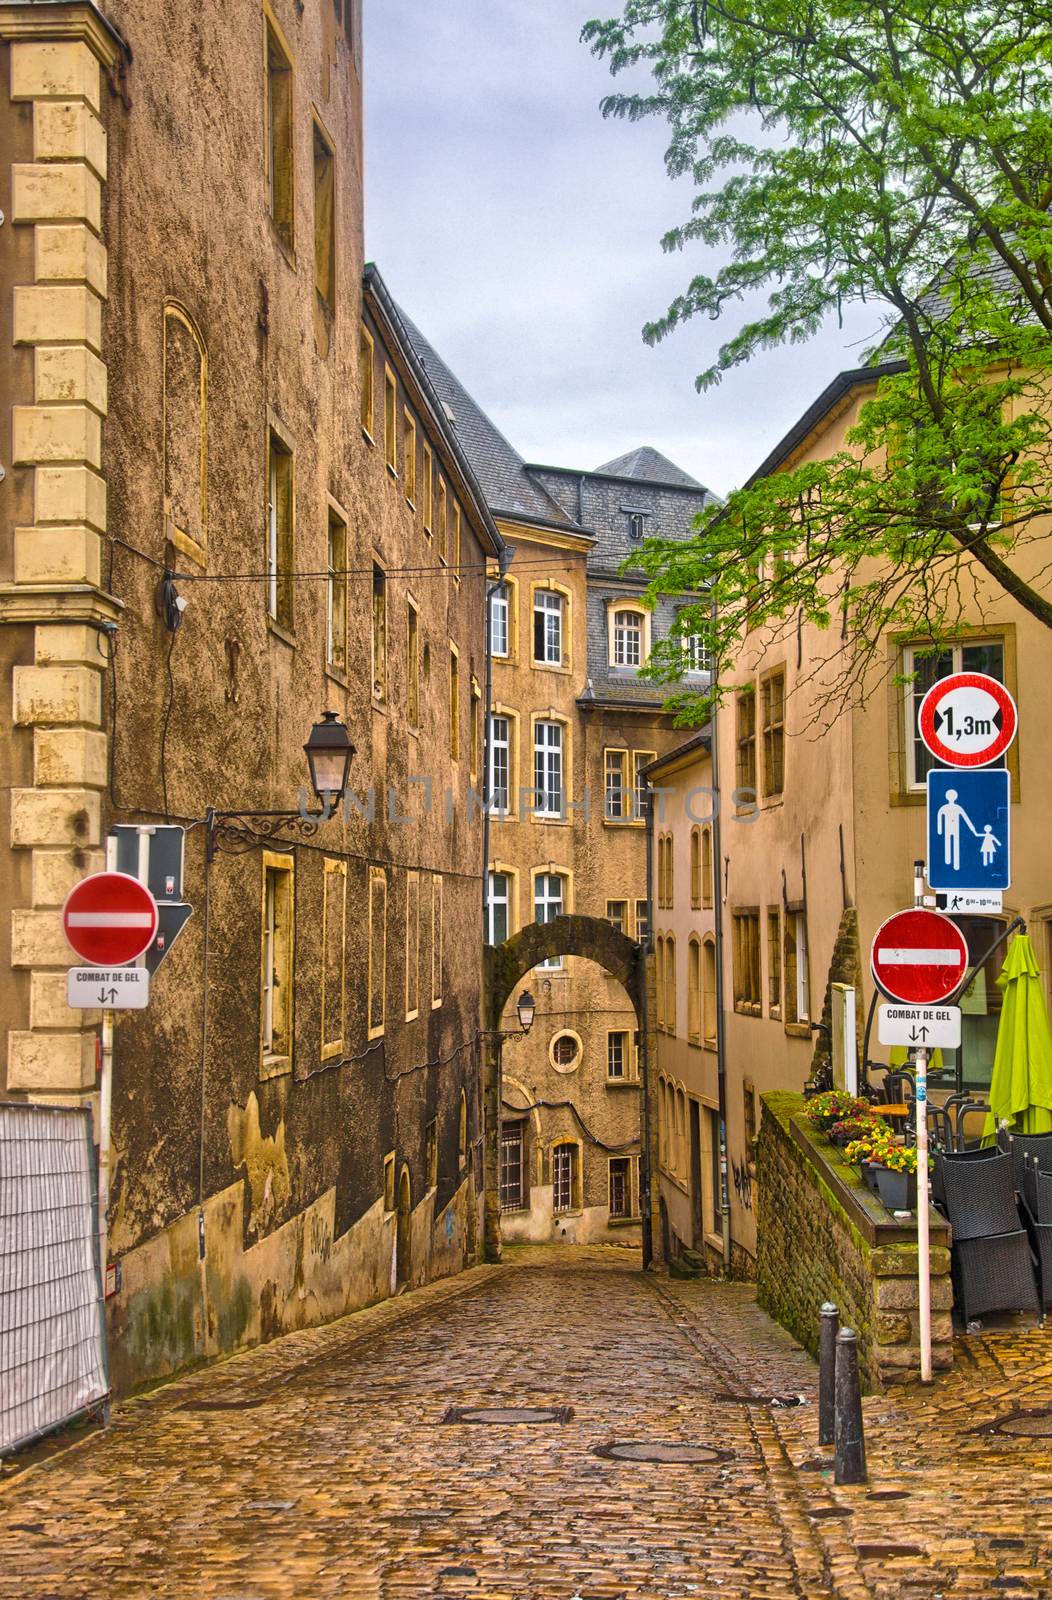 Narrow medieval street in Luxembourg, Benelux, HDR by Eagle2308